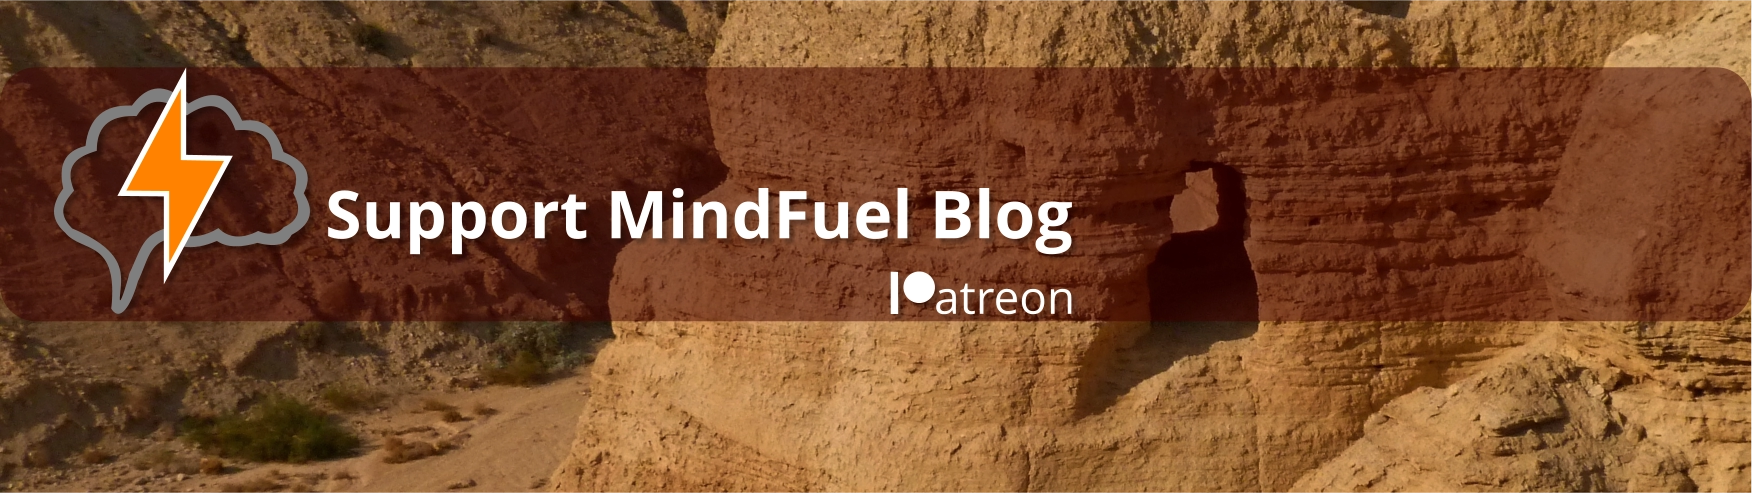 Picture of dead sea scroll cave with "Support Mindfuel Blog on Patreon" shamelessly promoted on top